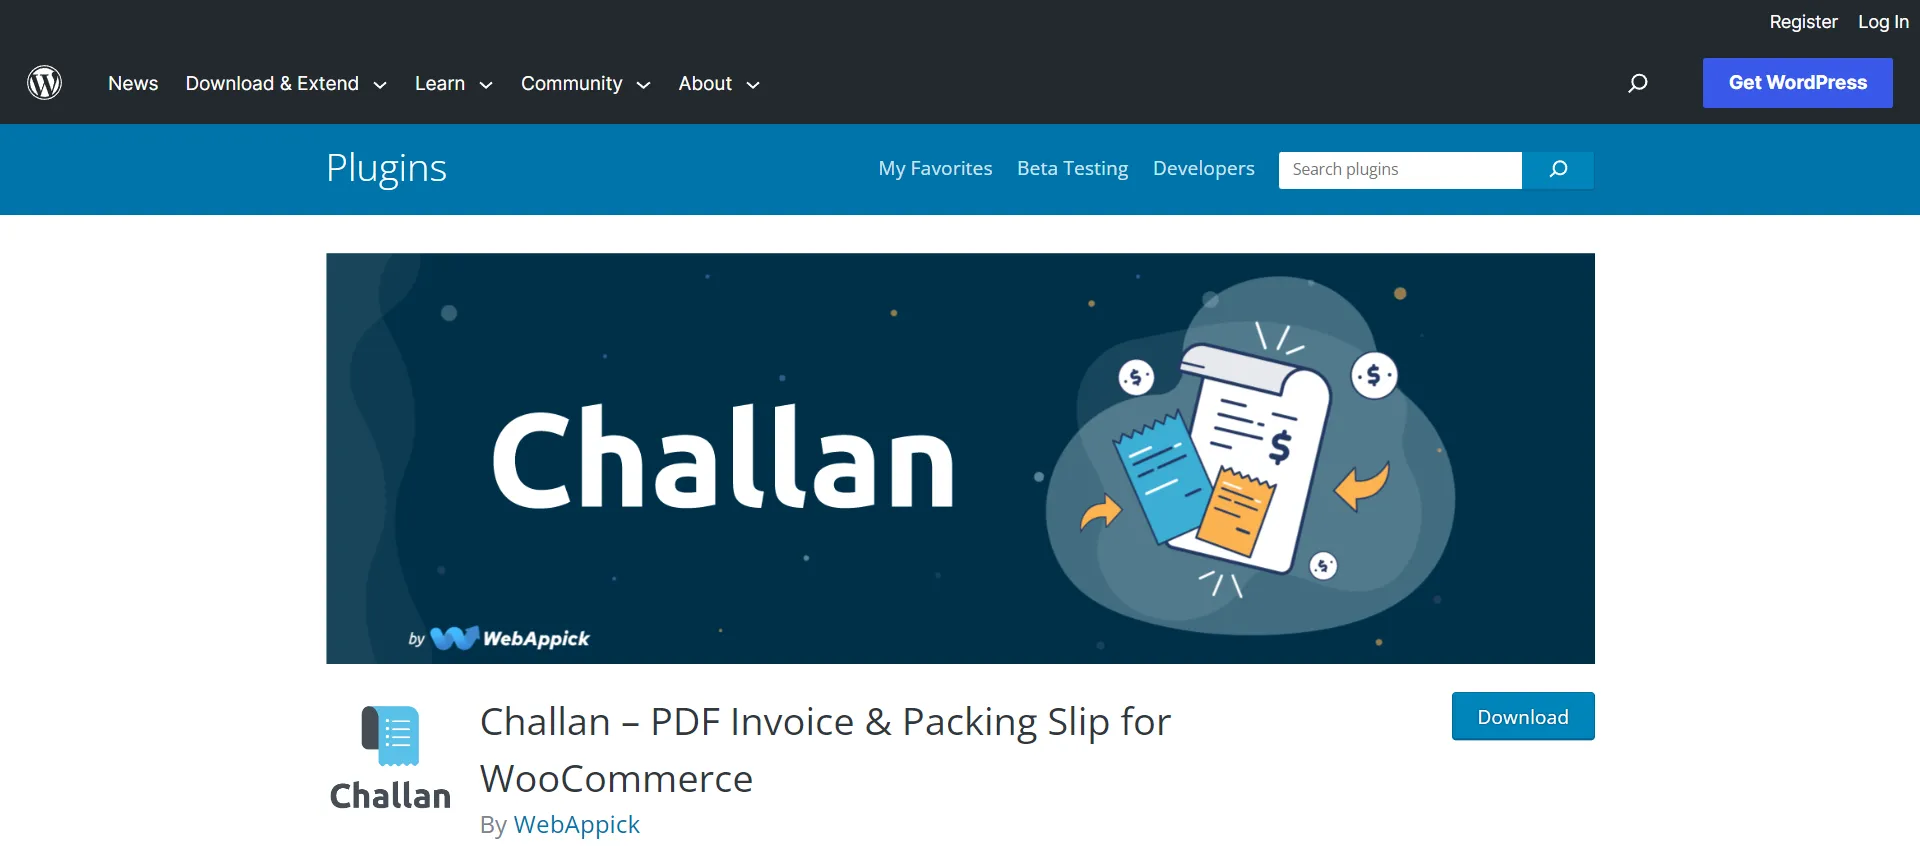 Challan – PDF Invoice & Packing Slip for WooCommerce